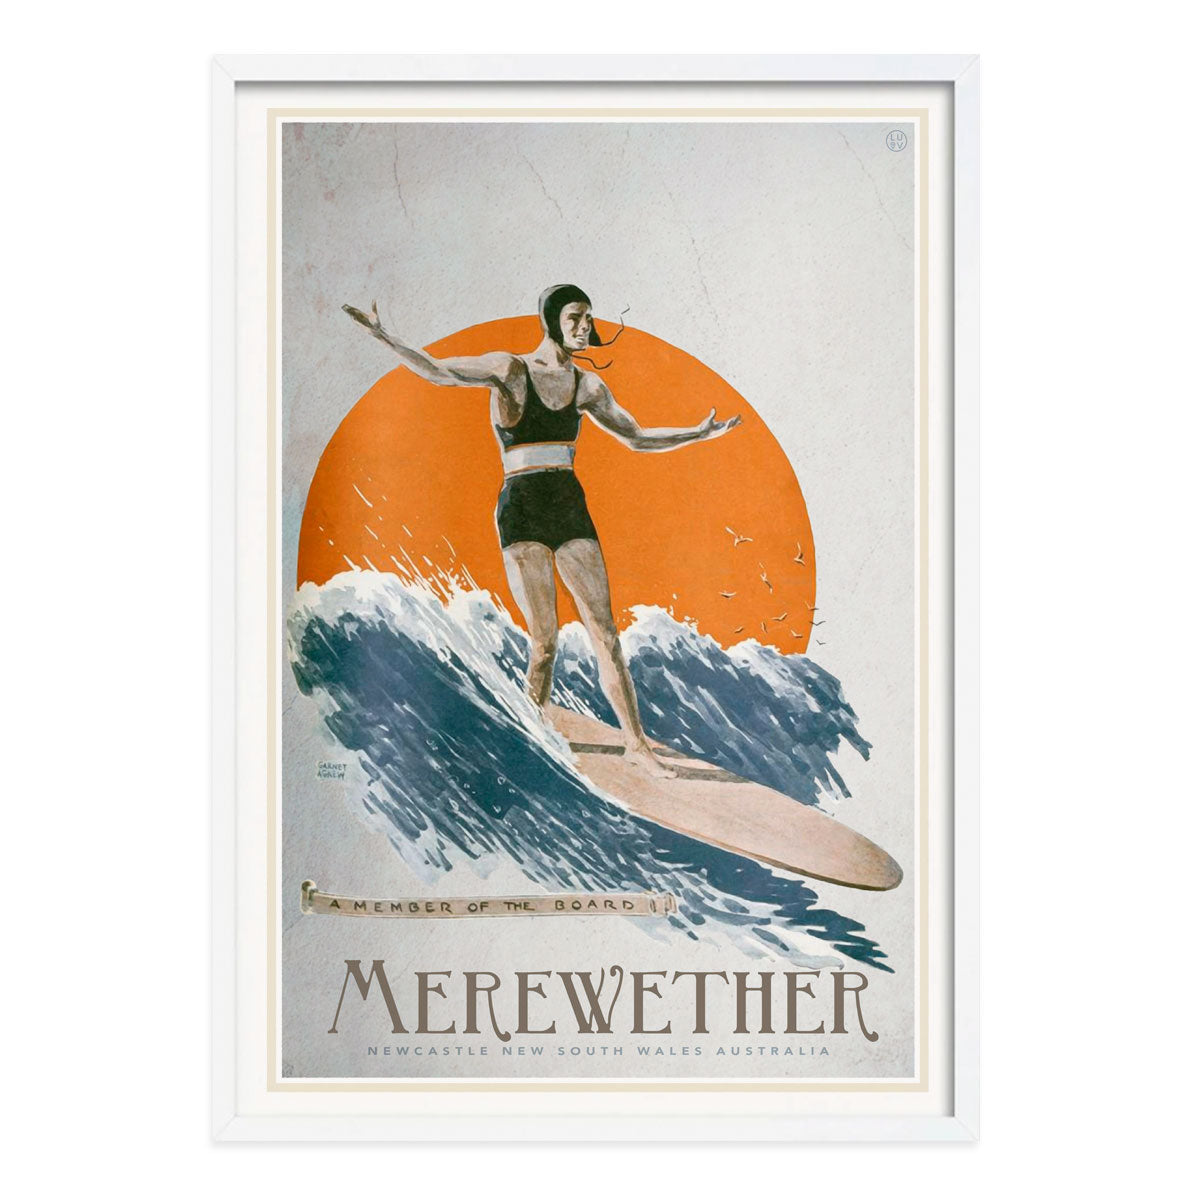 Merewether retro vintage surfer poster print in white frame from Places We Luv